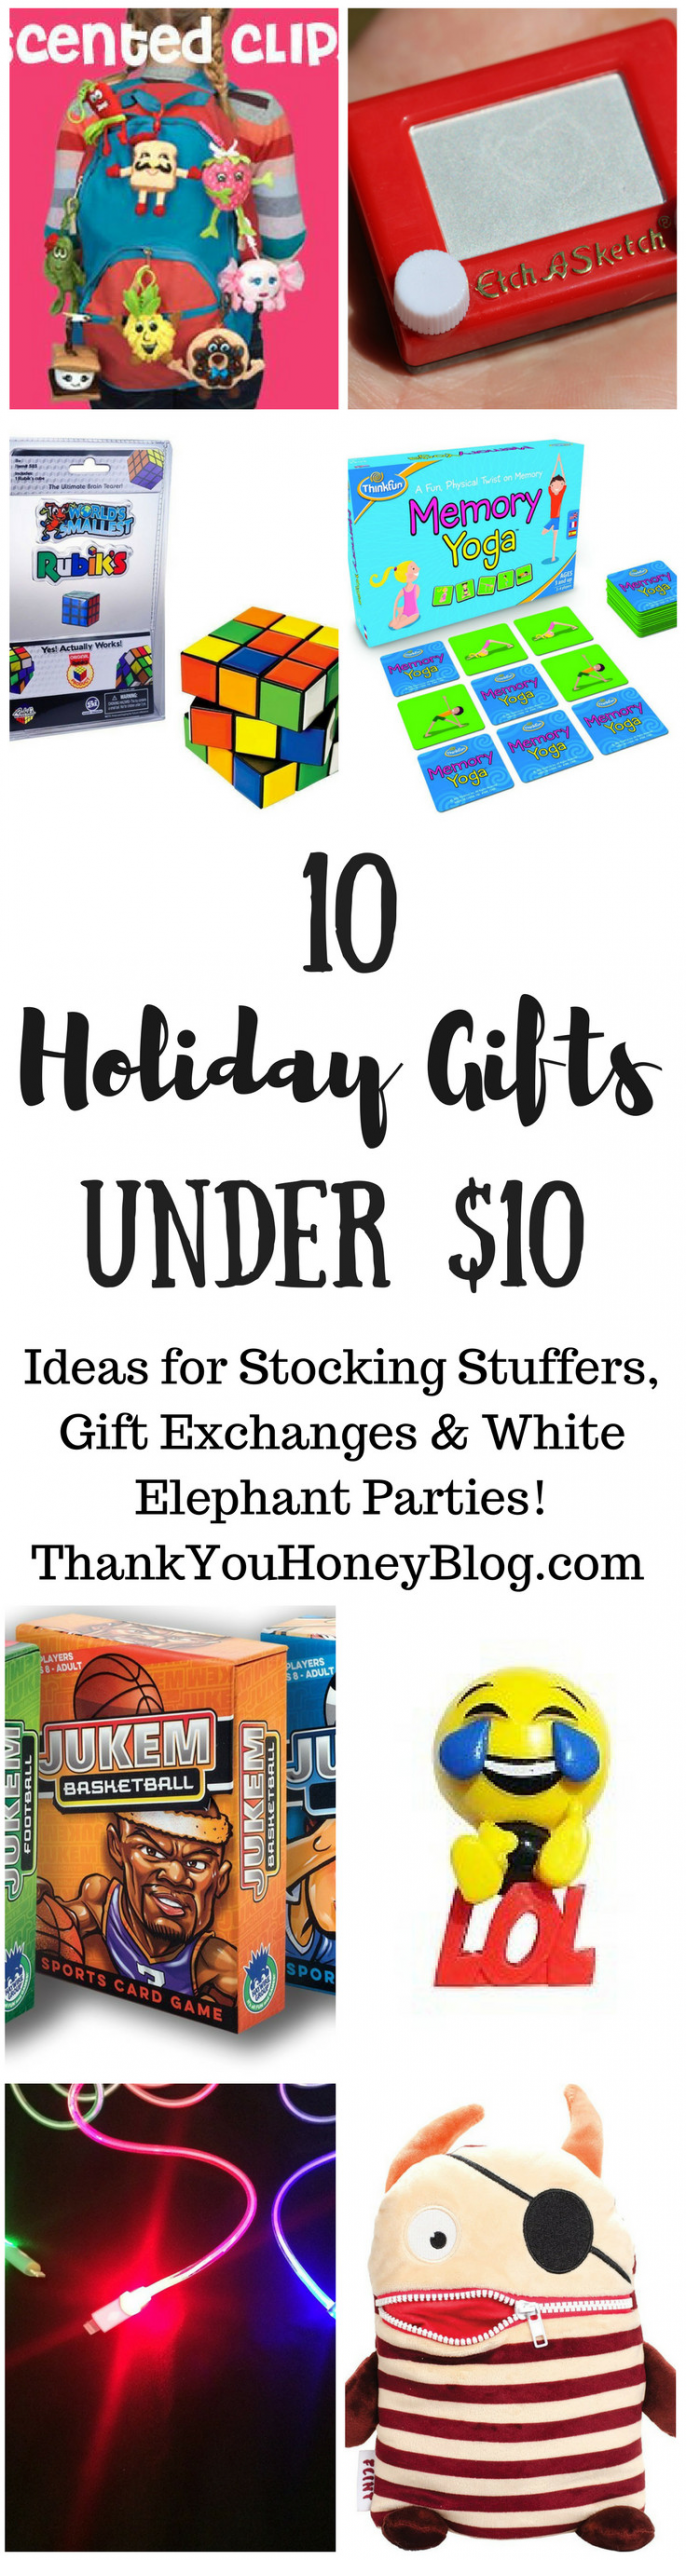 Christmas Gift Ideas Under $10
 10 Holiday Gifts Under $10